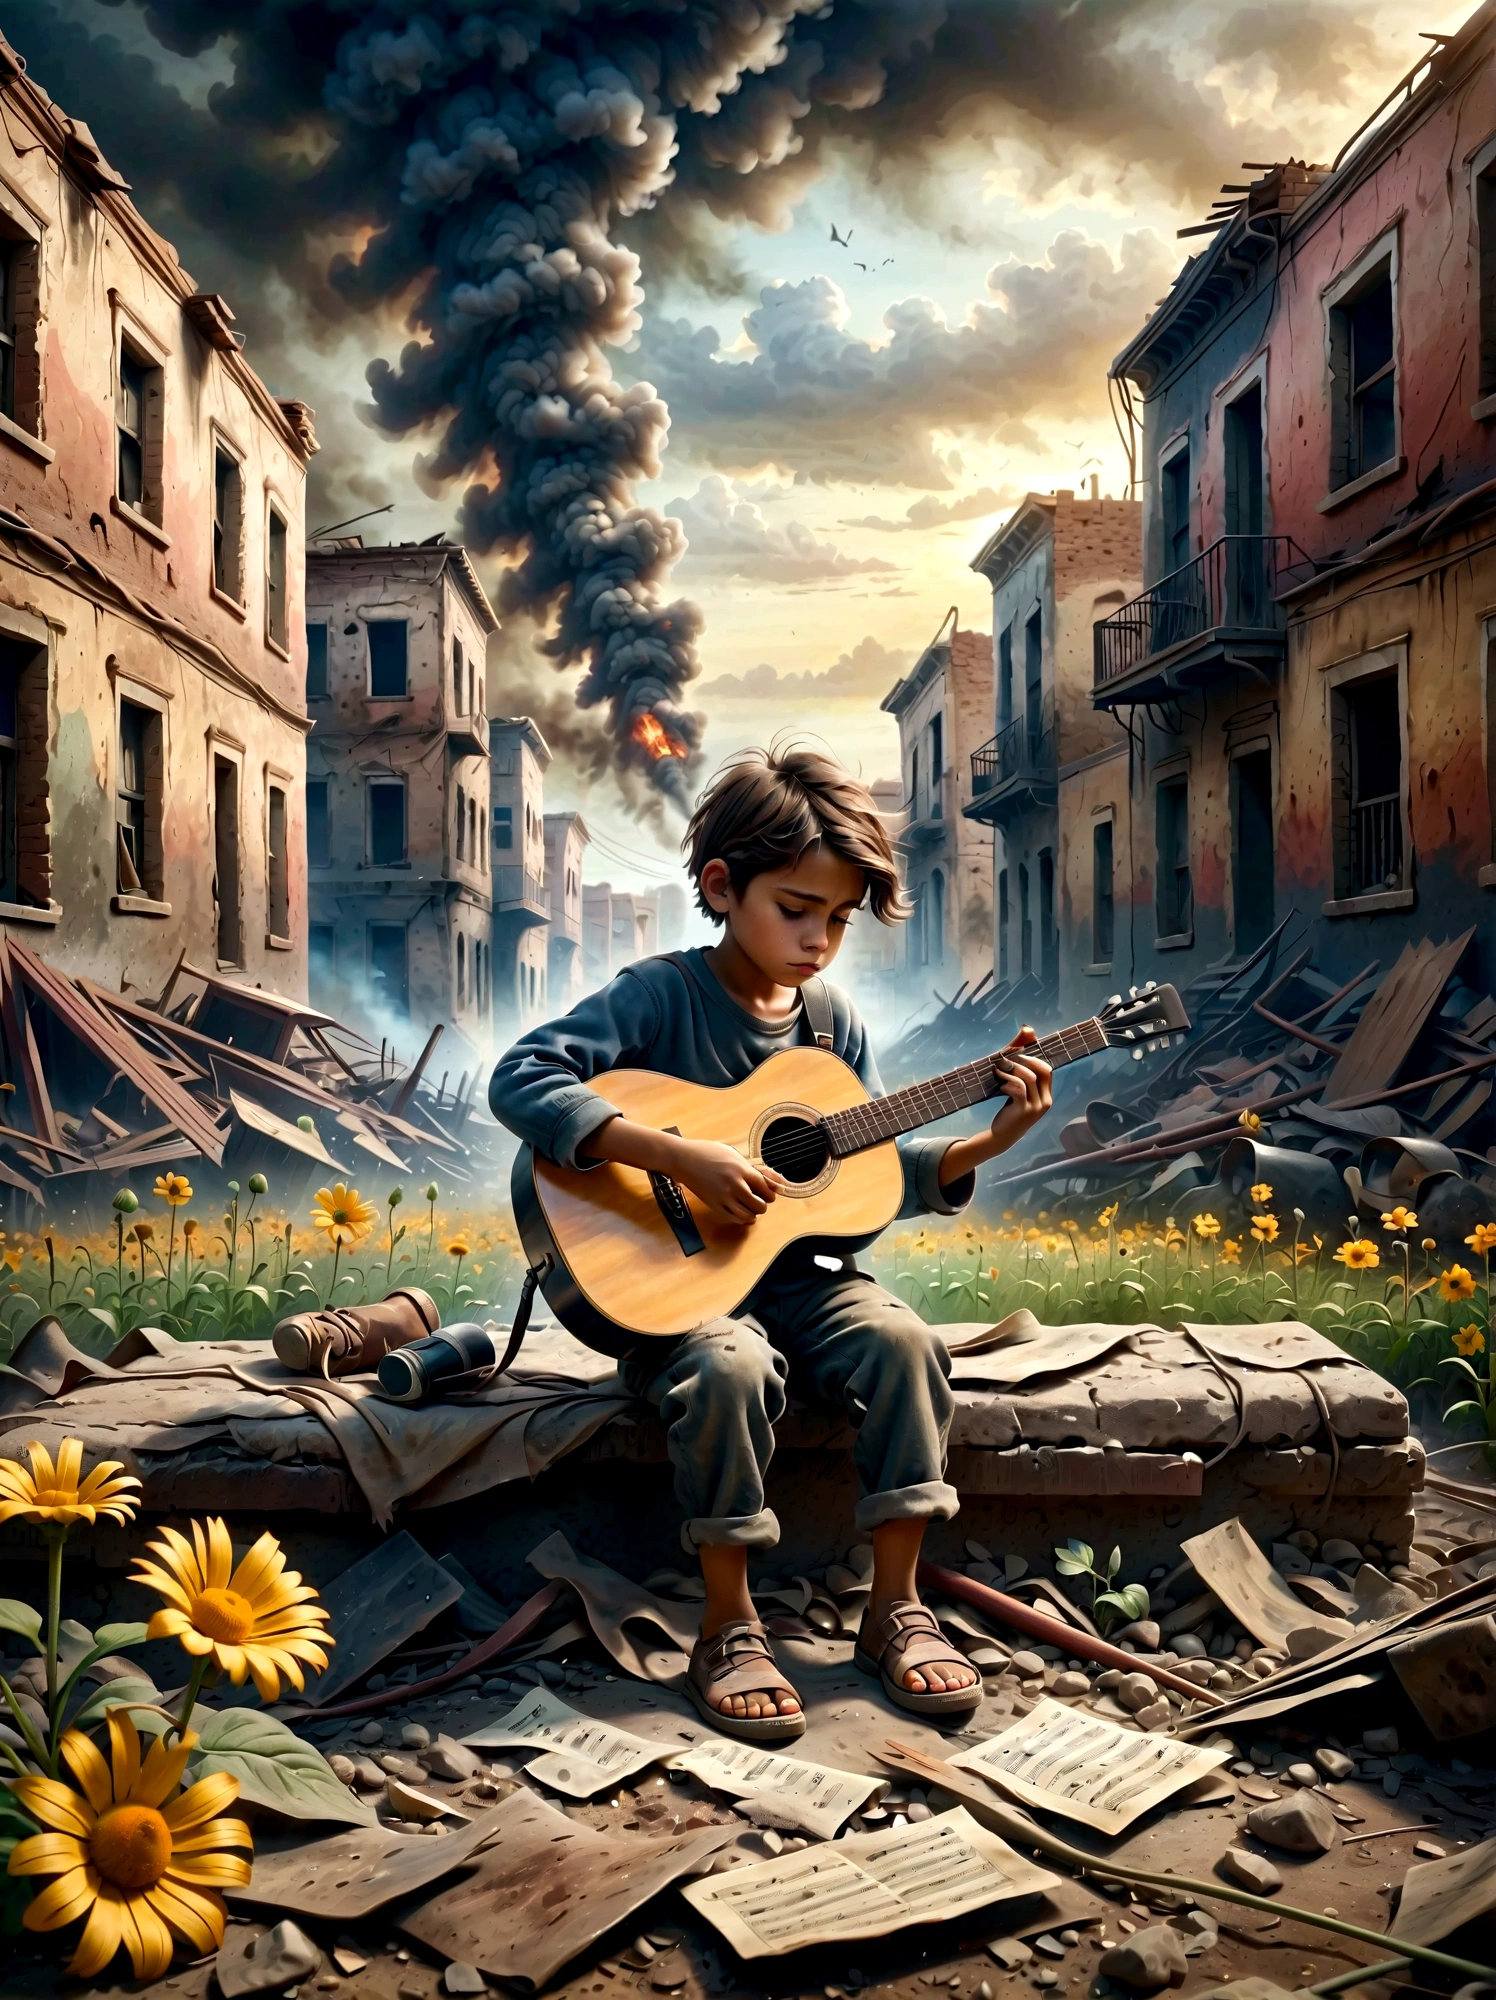 In the midst of a war-torn, smoky ruin, a  child is playing a guitar, (A tenacious little flower grows at the child&#39;s feet), The scene captures the stark contrast between the devastation of the surroundings and the innocence of the . The ruins are filled with debris and remnants of buildings, with smoke and fire in the background. The child's expression is somber, reflecting the harsh reality of the situation. The overall mood is poignant and emotional, with muted colors and dramatic lighting to emphasize the desolation and the glimmer of hope represented by the music.